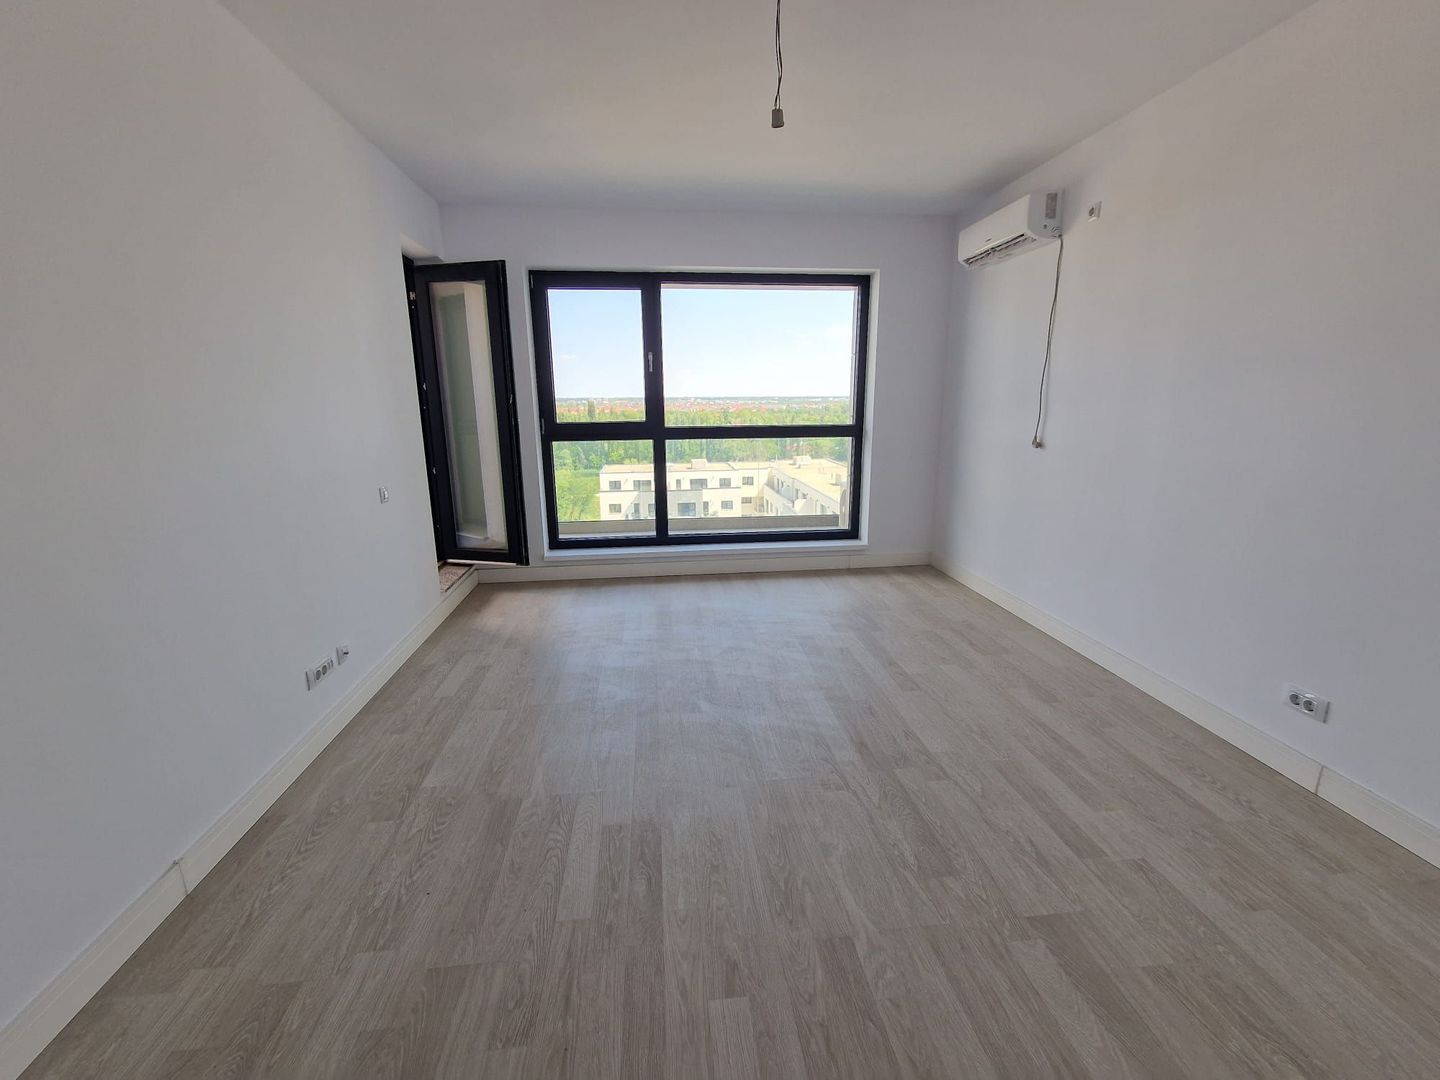 3-room apartment in the Aviation area